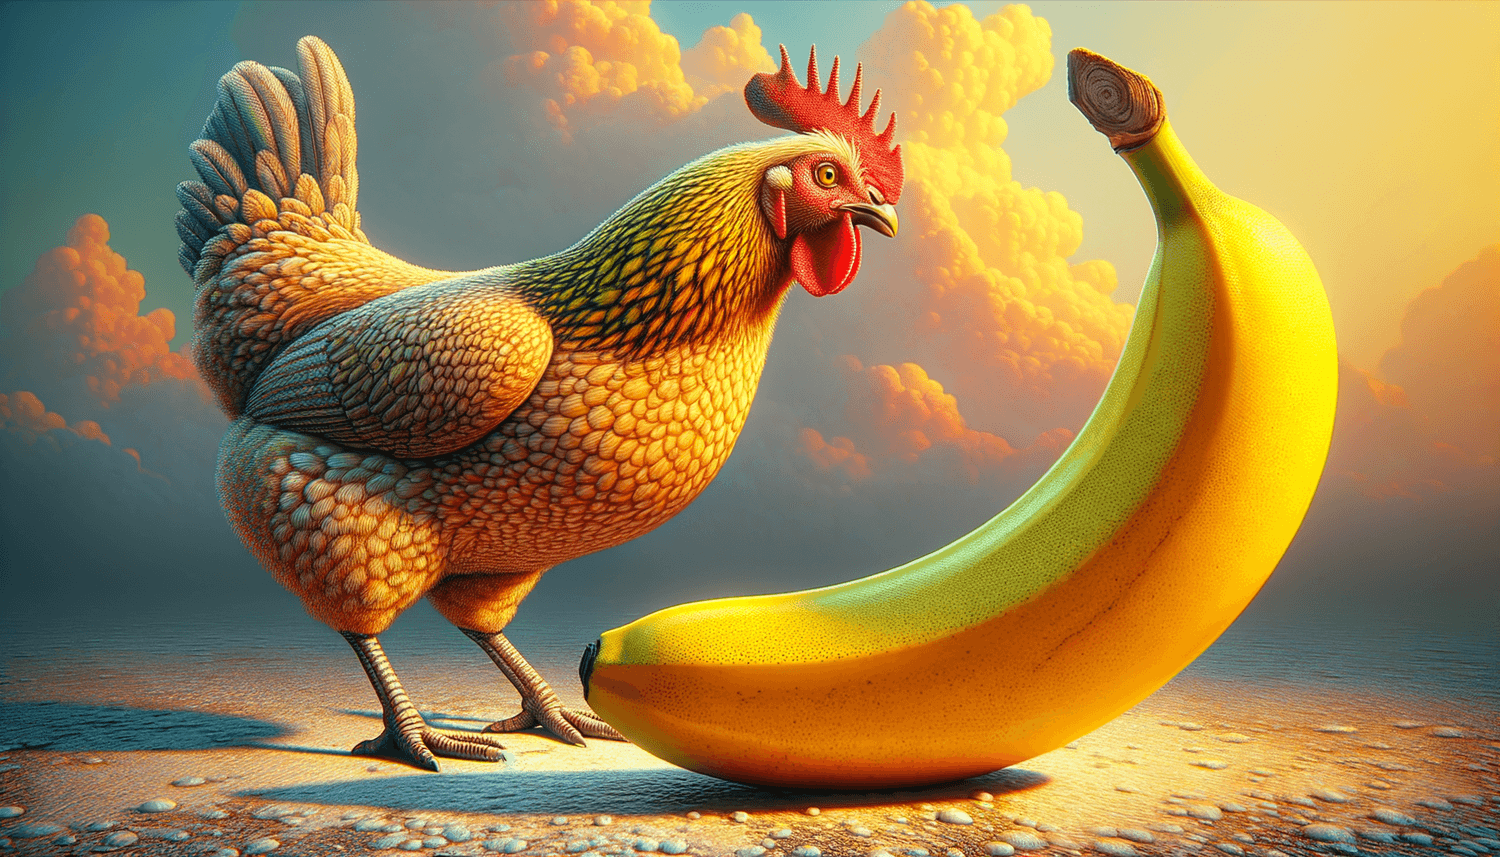 Can Chickens Eat Banana?